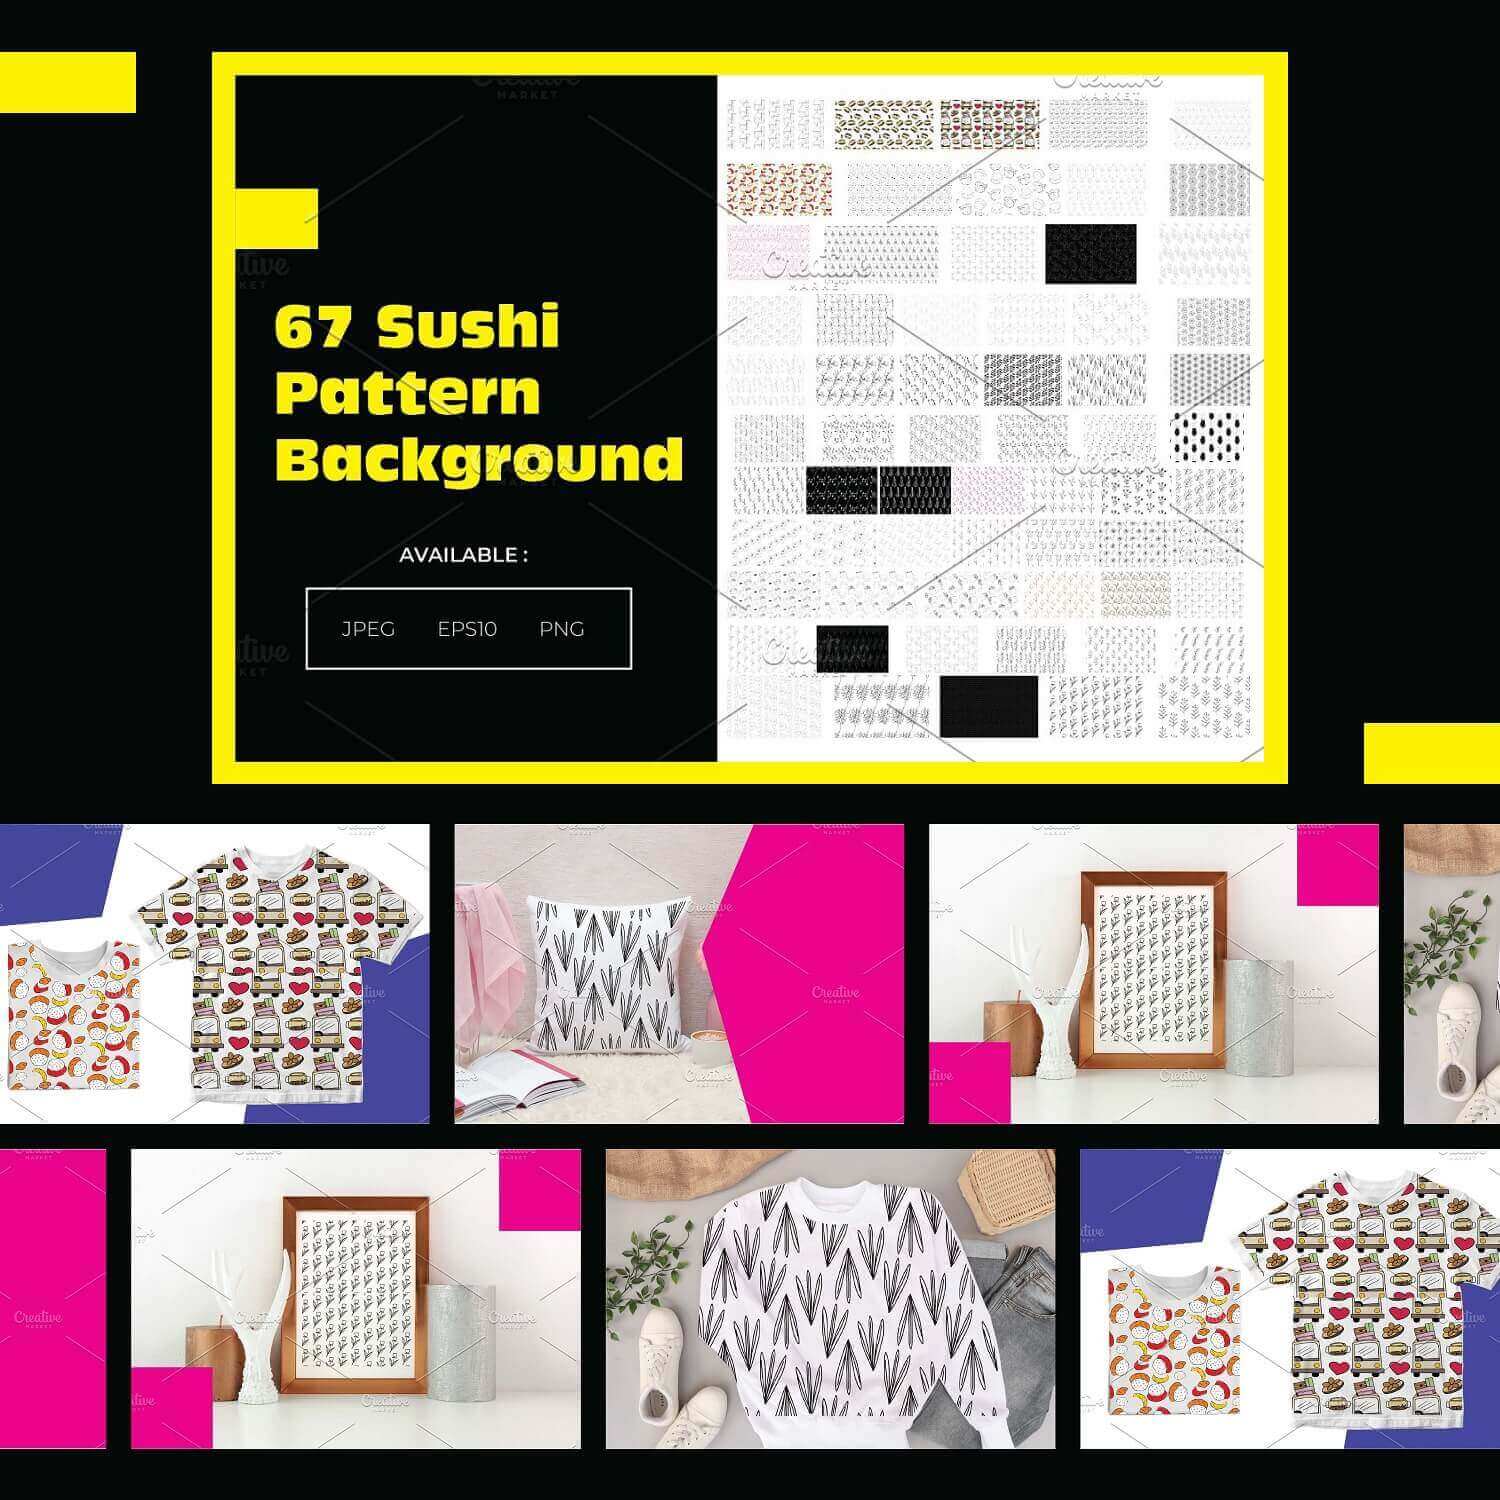 67 Sushi Food Pattern Background on the casual things.